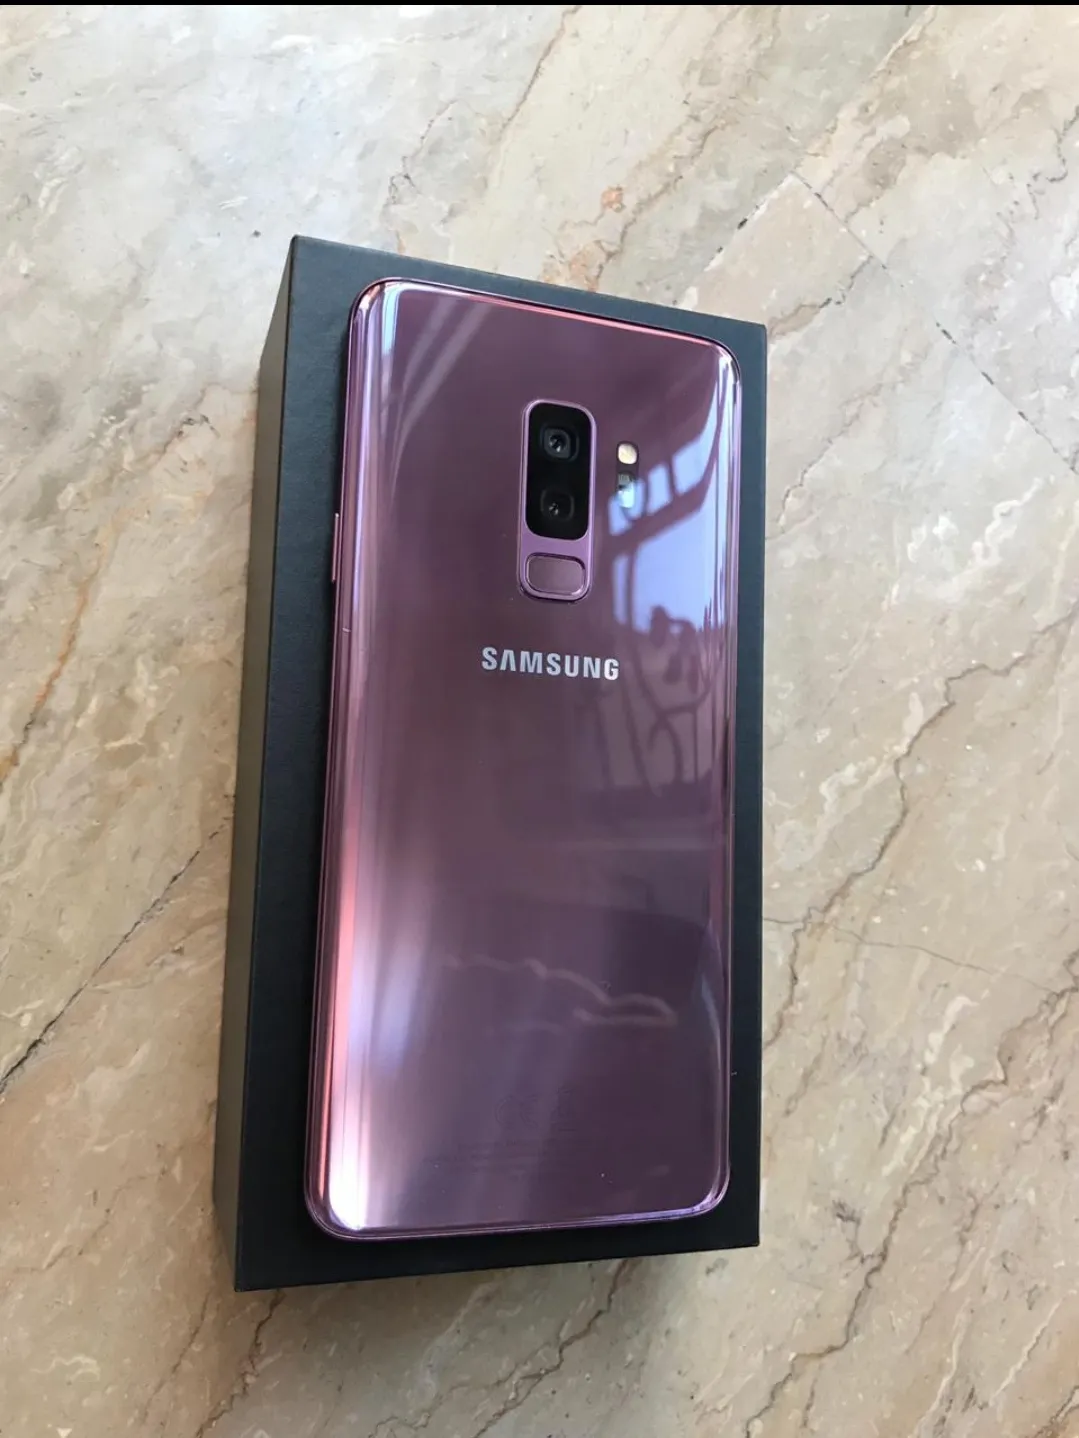 MINT CONDITION SAMSUNG GALAXY S9 PLUS FOR SALE - photo 1